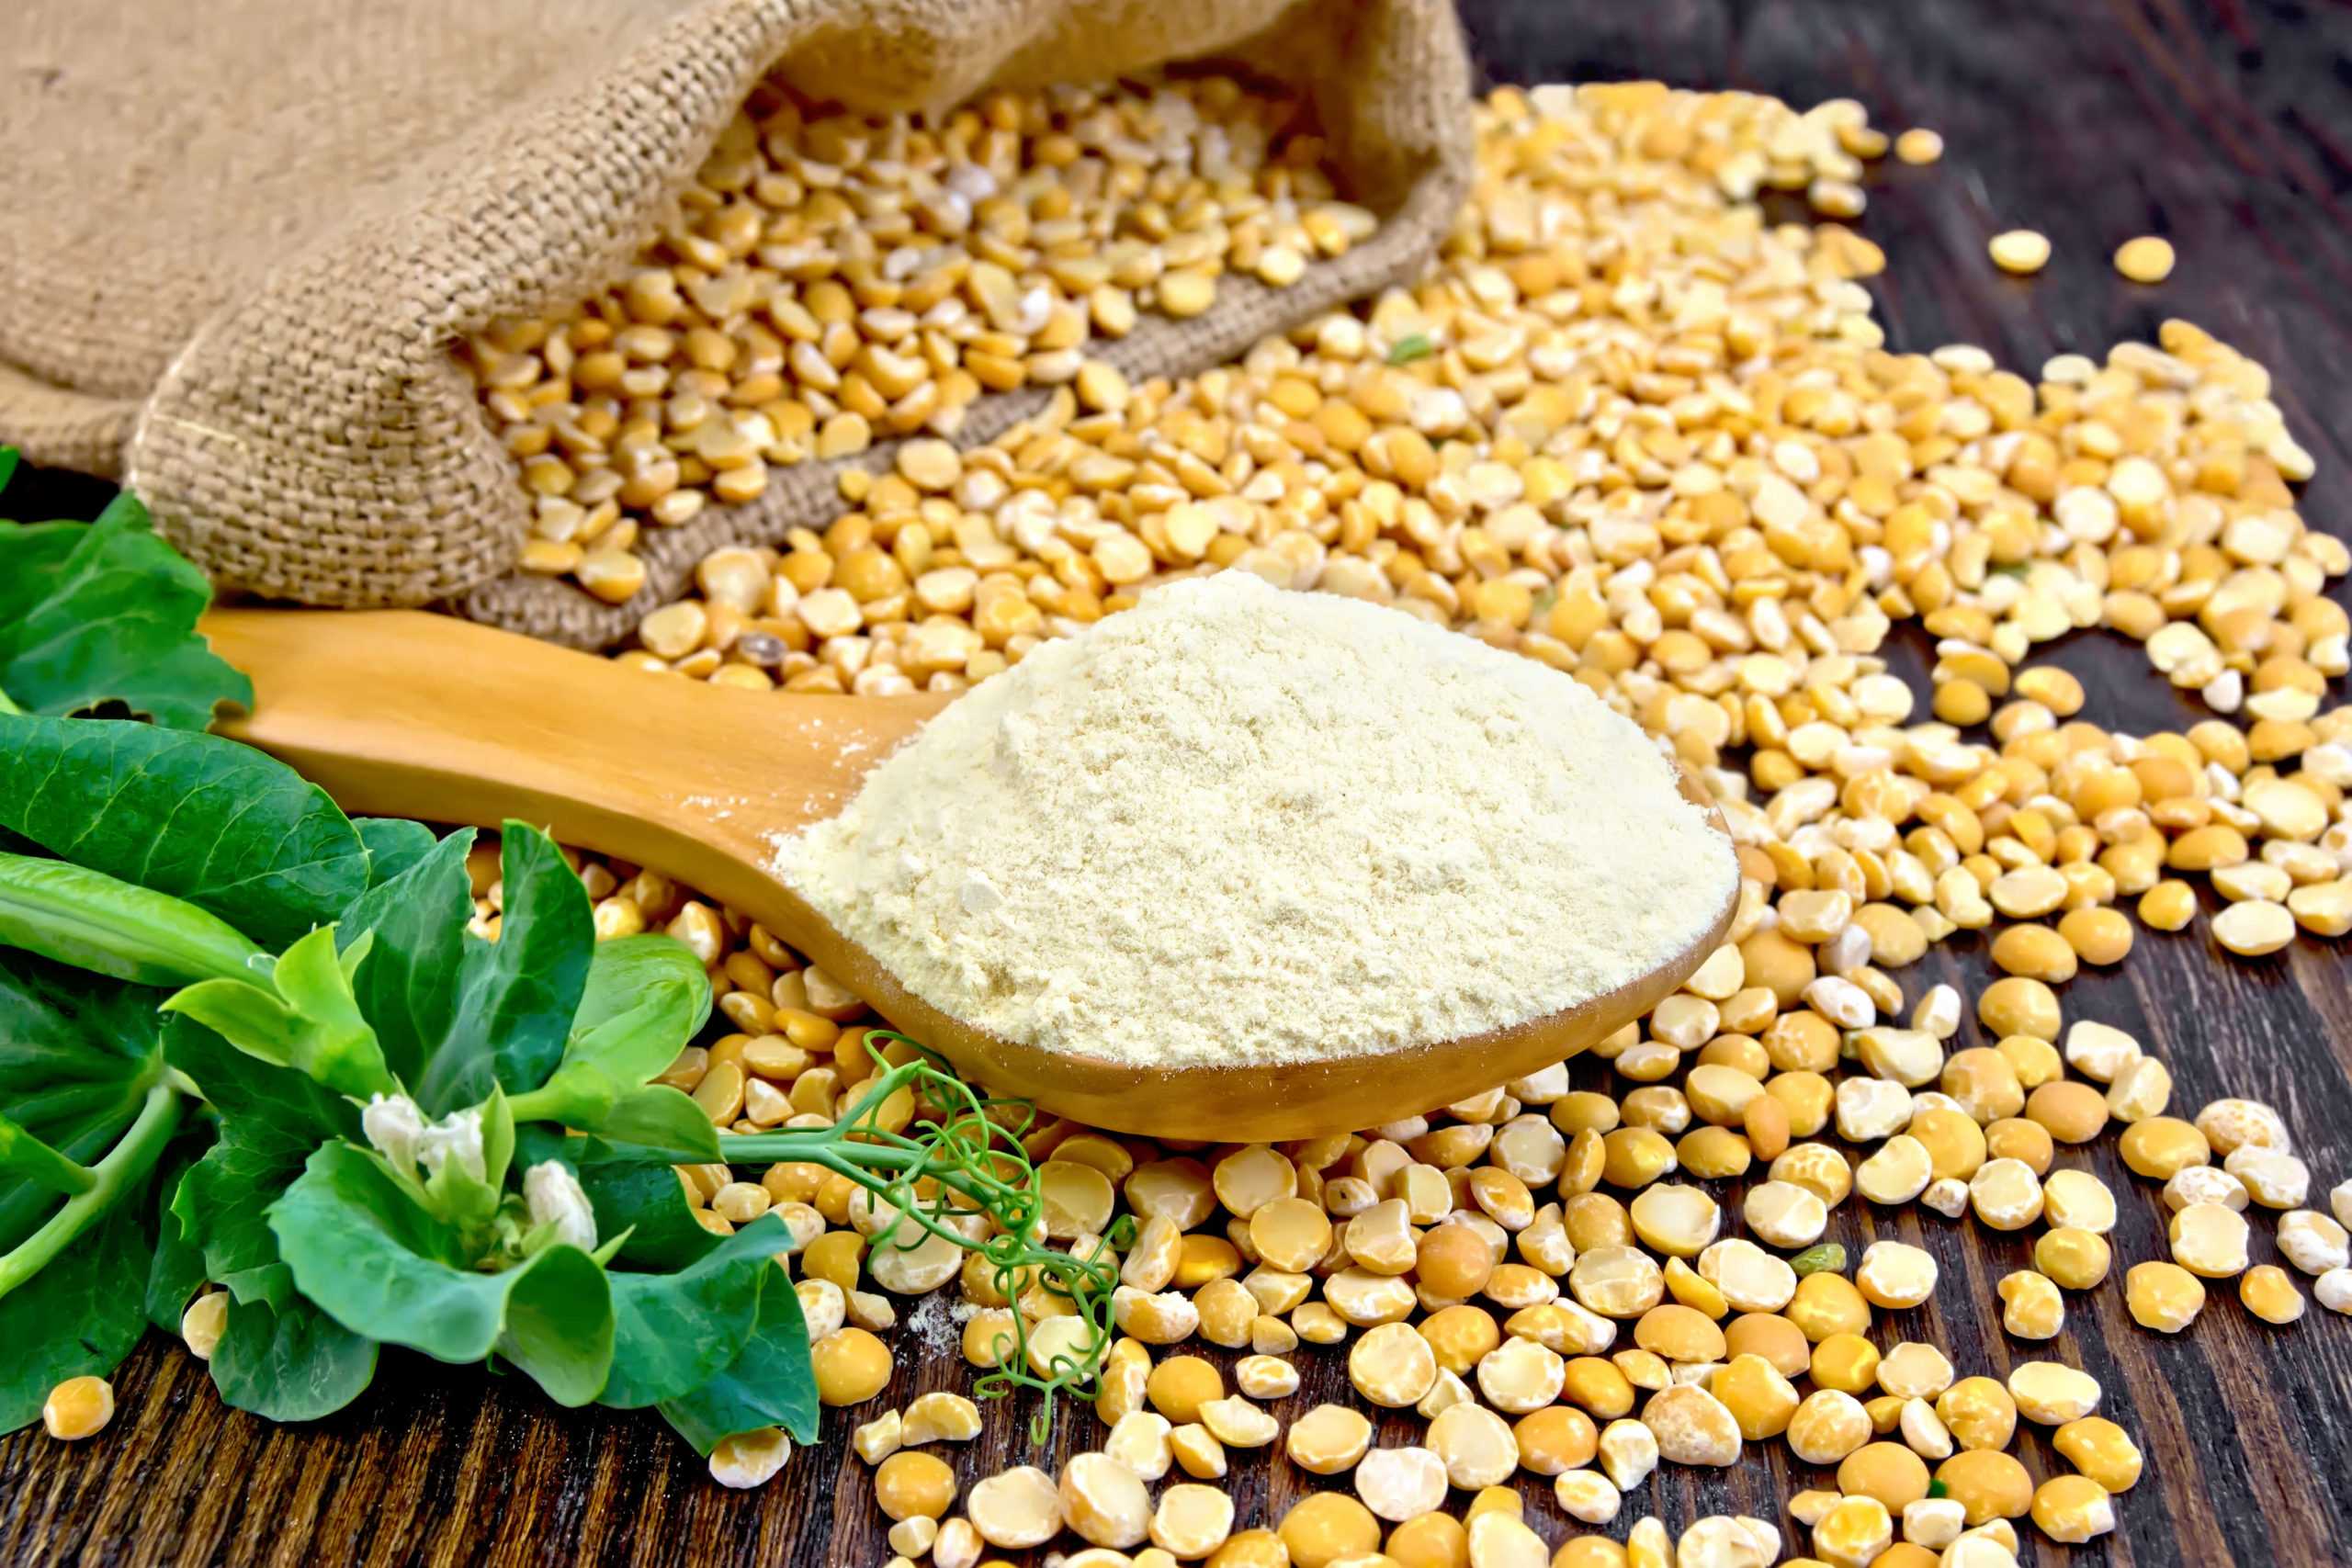 Growth of Plant-Based Proteins: Soybean and Pea Protein